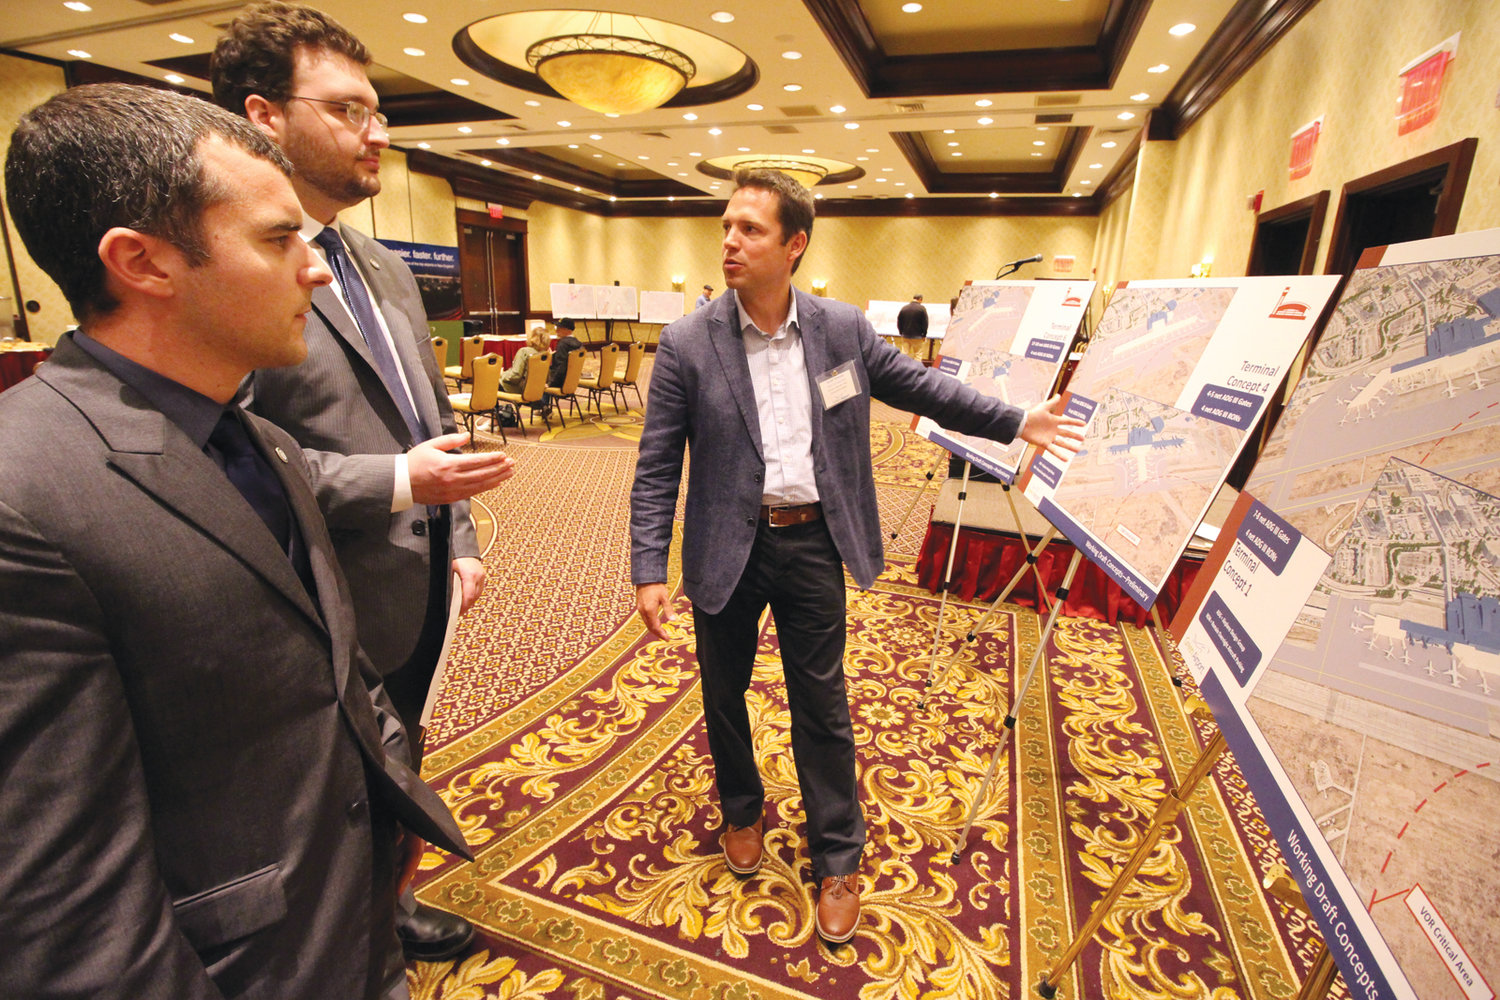 A BIGGER TERMINAL? Scott Tumolo of C&S reviews possible plans for the expansion of the Sundlun Terminal with Warwick City Council members Anthony Sinapi of Ward 8 and Jeremy Rix of Ward 2.